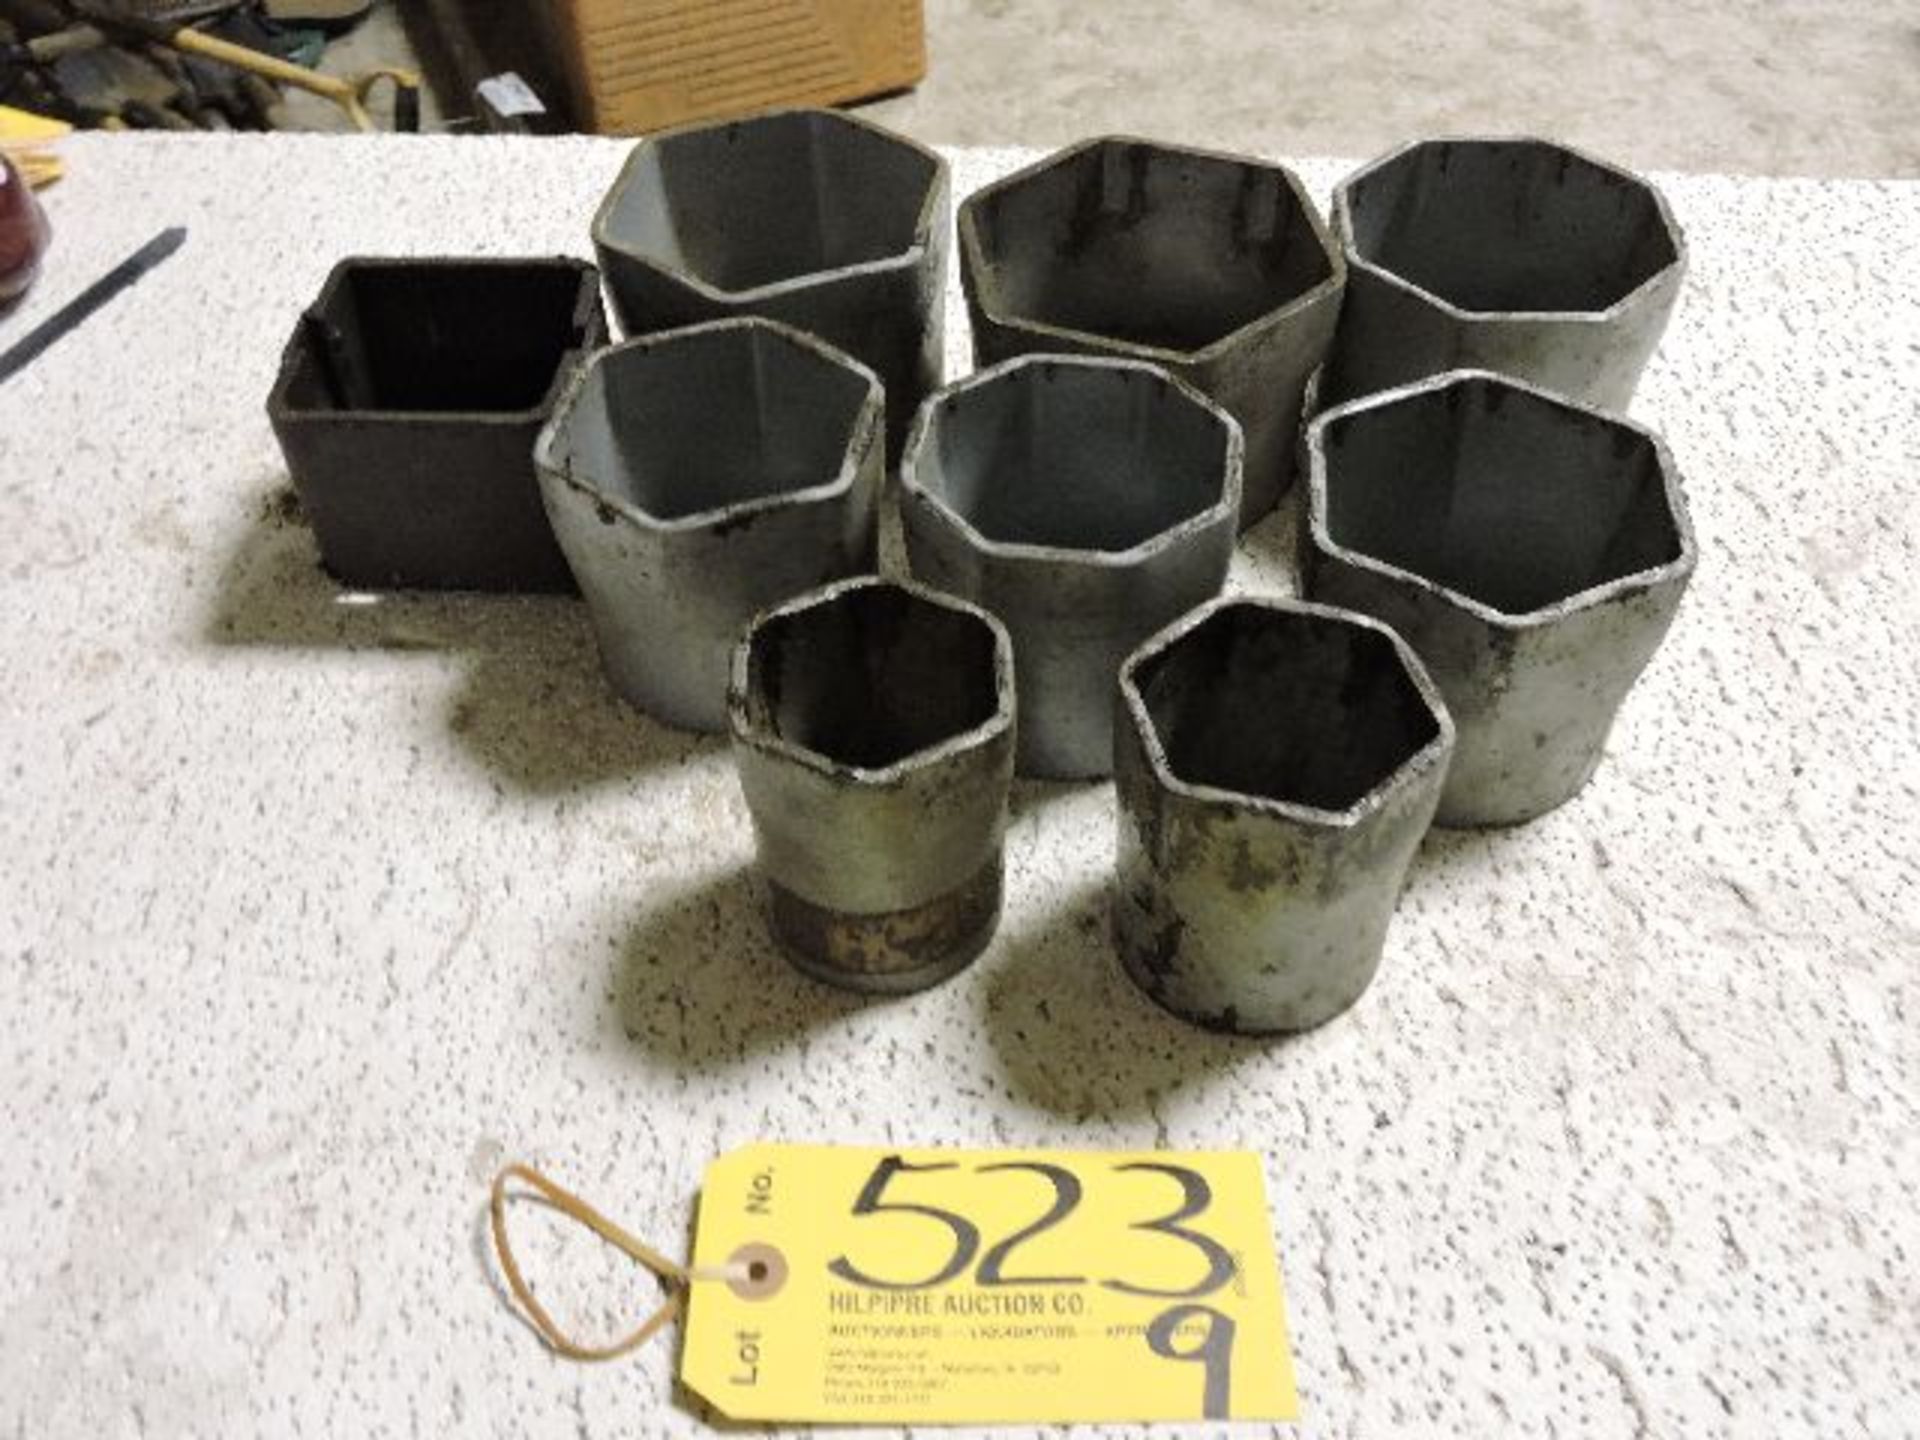 Large Hex sockets up to 4".